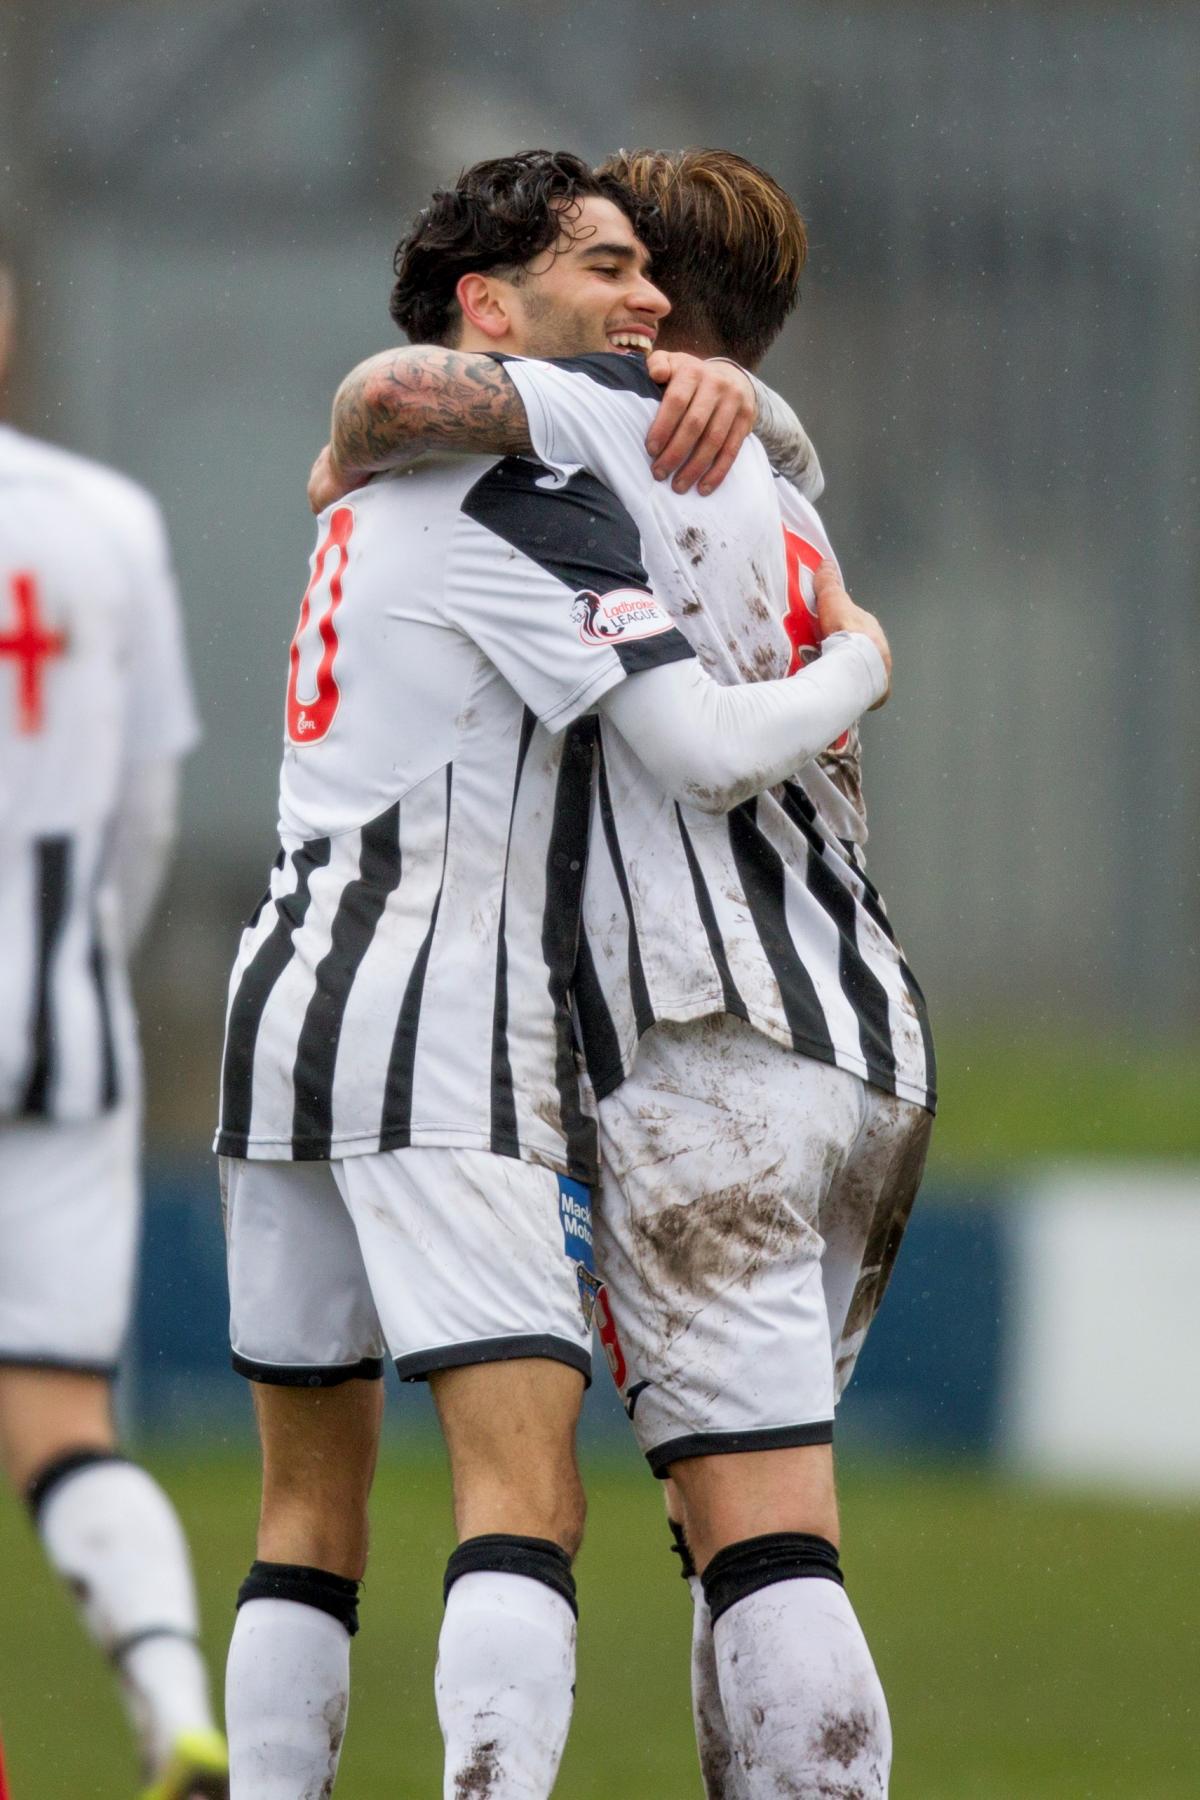 FAISSAL EL BAKHTAOUI scored his 30th goal of the season to hand League One winners Dunfermline victory at Albion Rovers this afternoon.